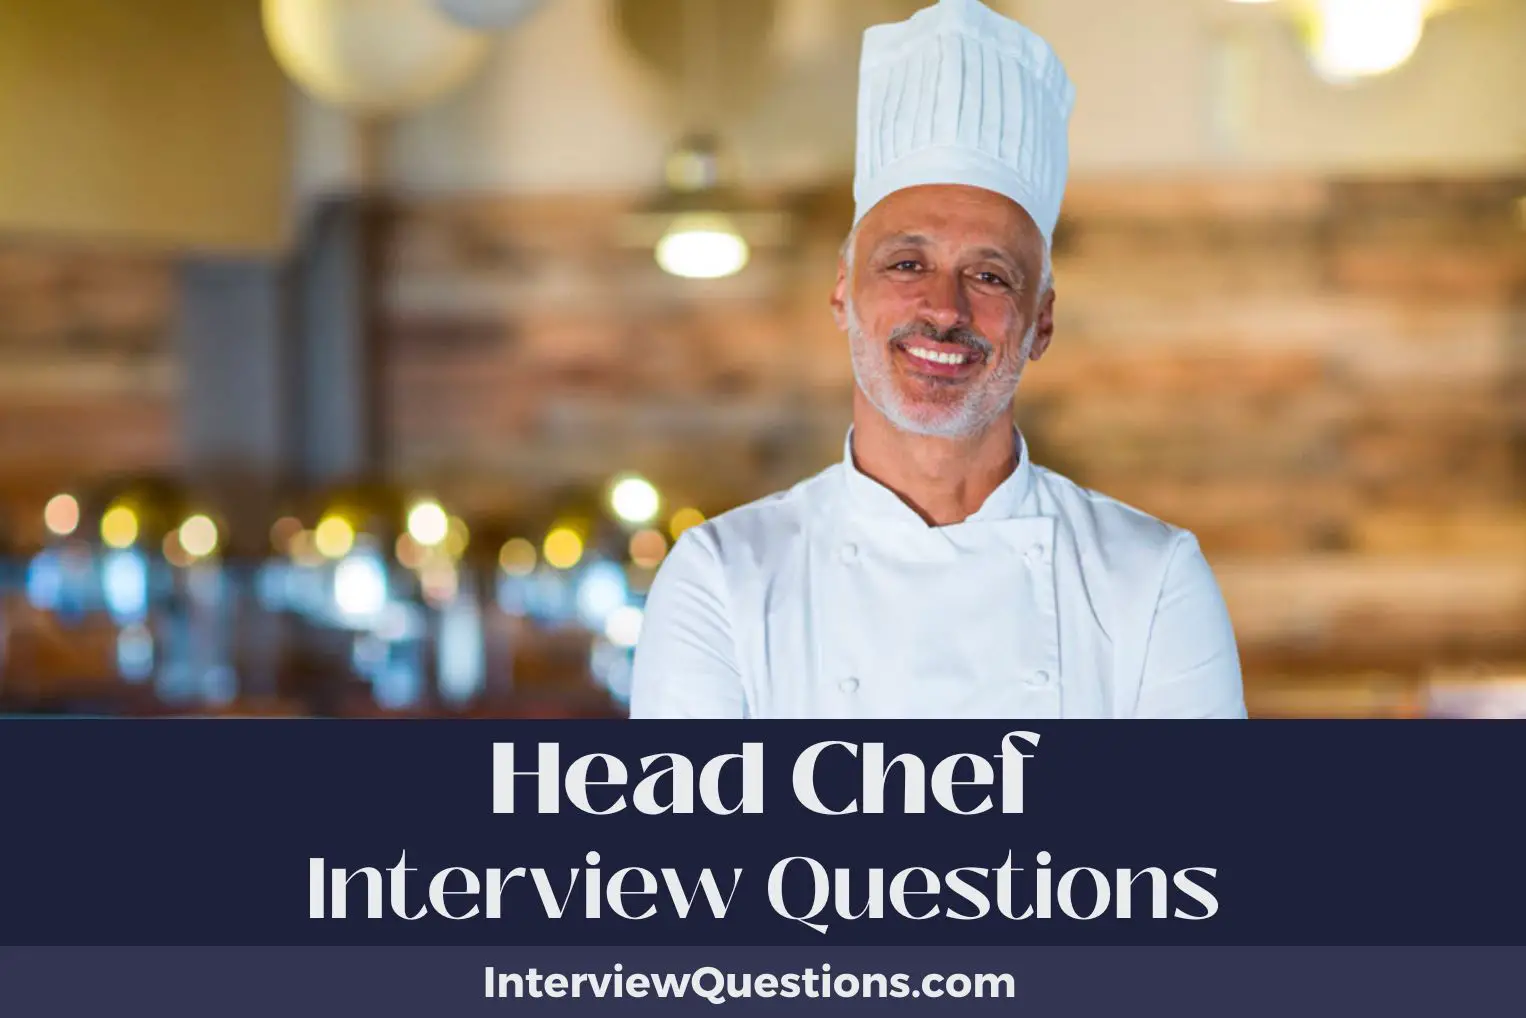 Head Chef Interview Questions